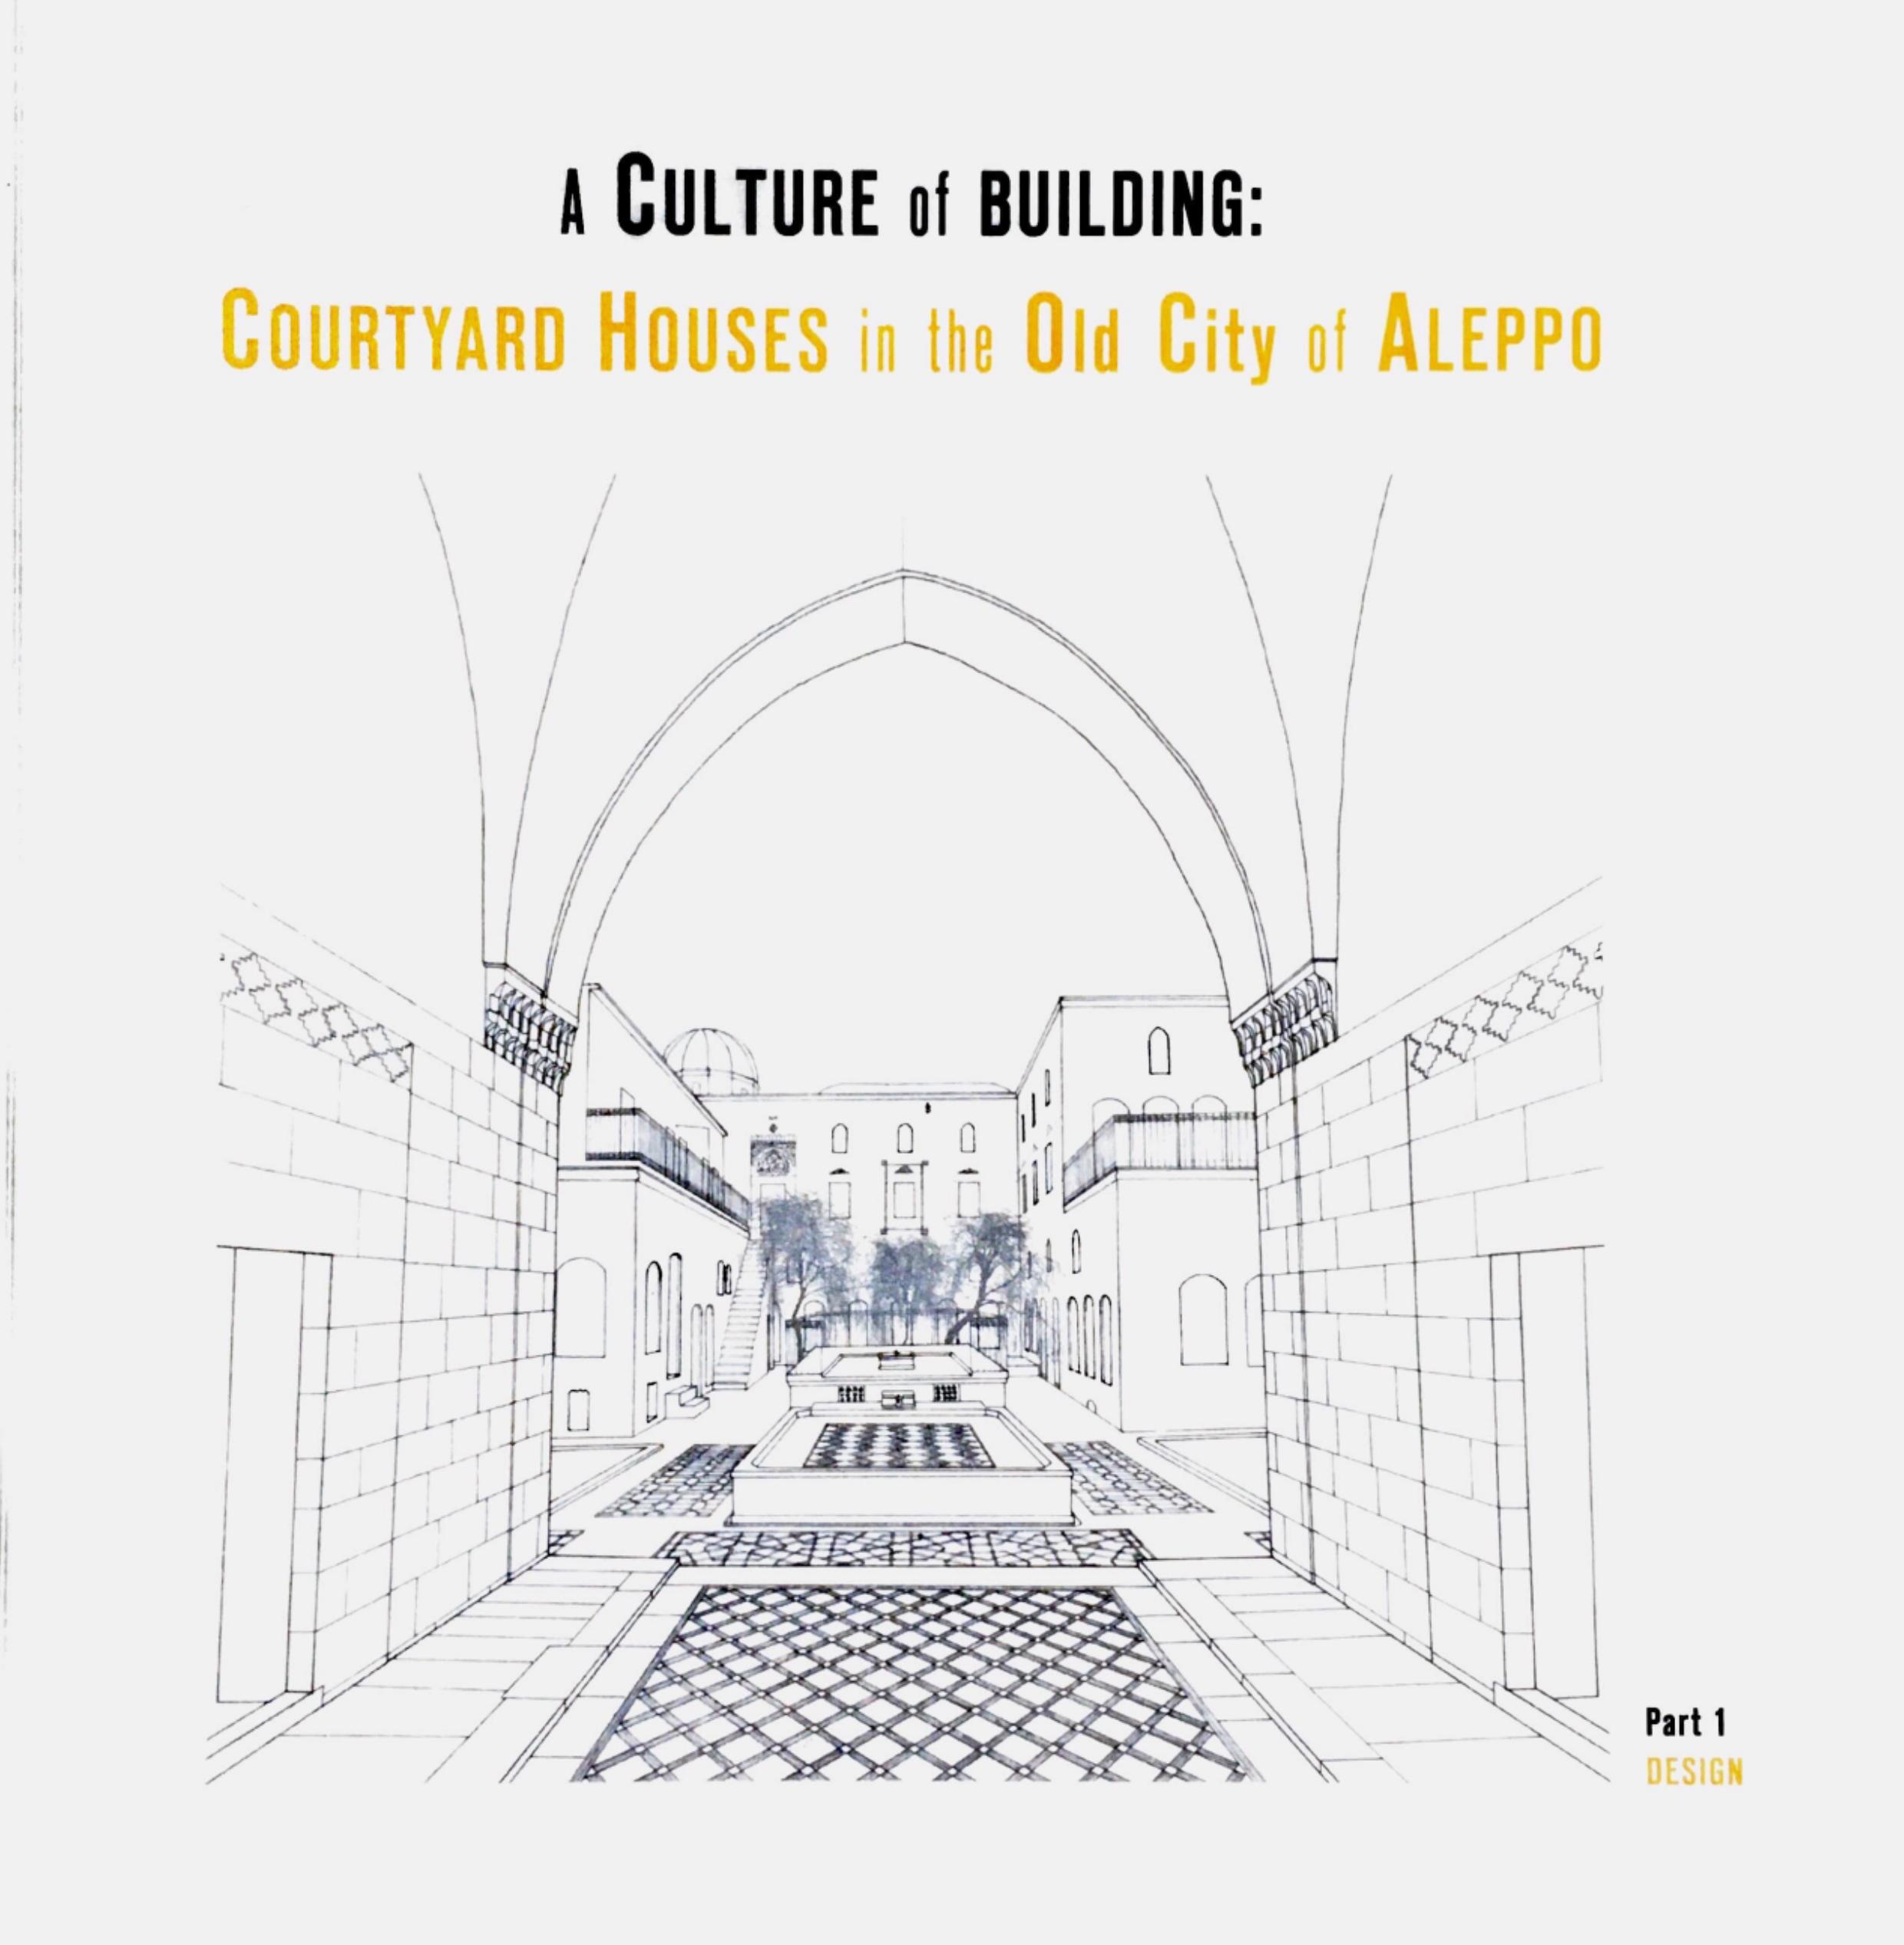 Dayoub, Dima – Ruba Kasmo – Anne Mollenhauer : A Culture of Building: Courtyard Houses in the Old City of Aleppo. Design (Part 1)